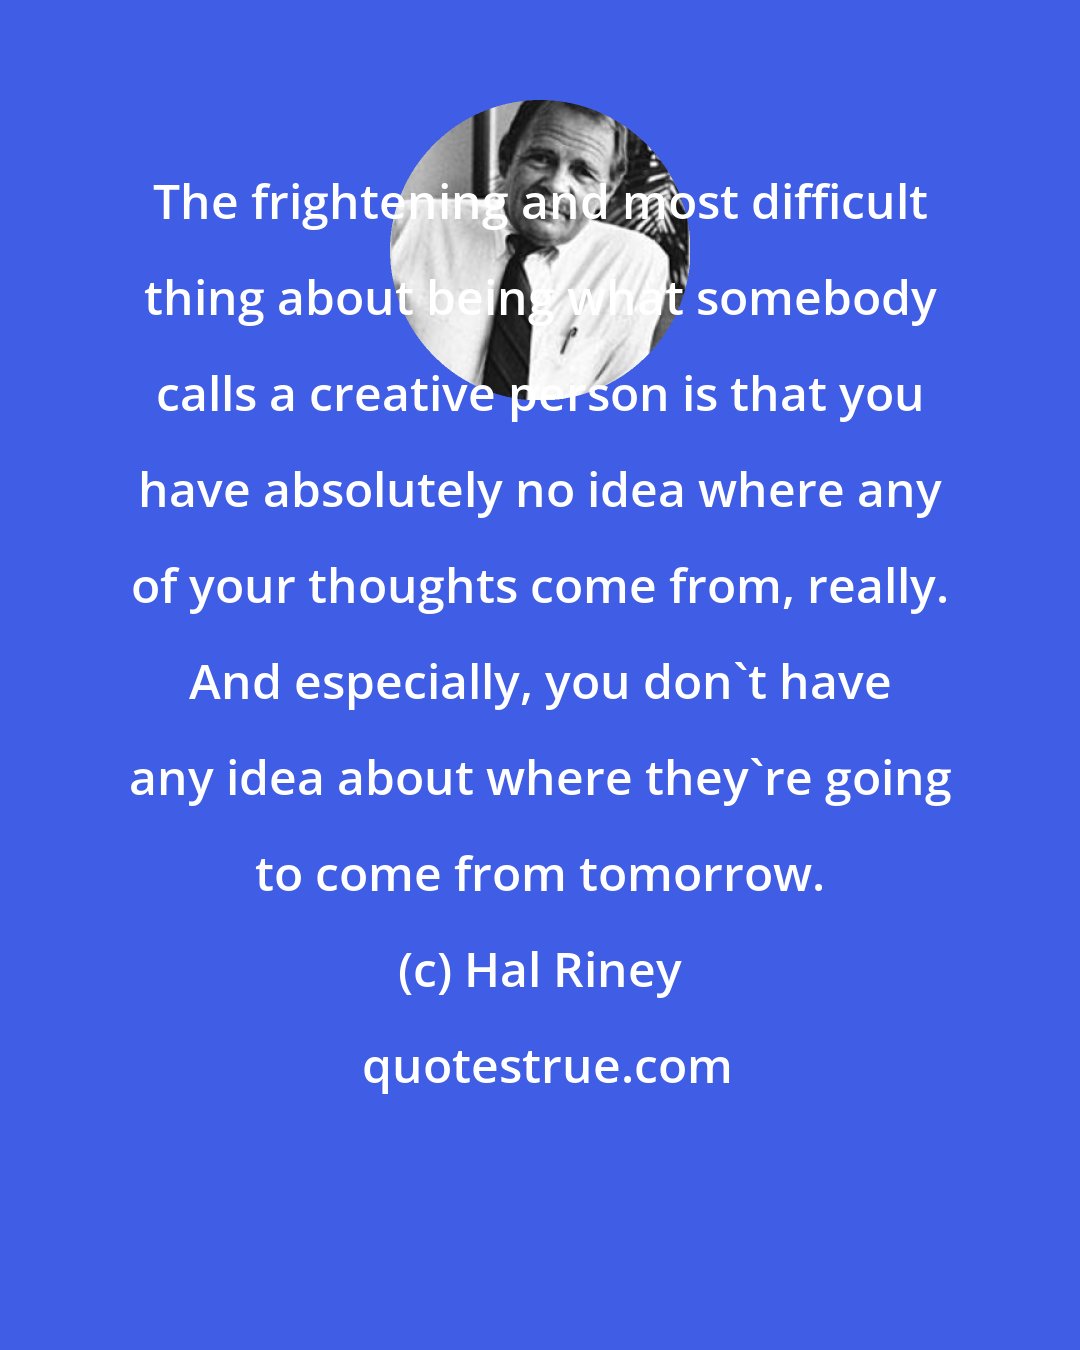 Hal Riney: The frightening and most difficult thing about being what somebody calls a creative person is that you have absolutely no idea where any of your thoughts come from, really. And especially, you don't have any idea about where they're going to come from tomorrow.